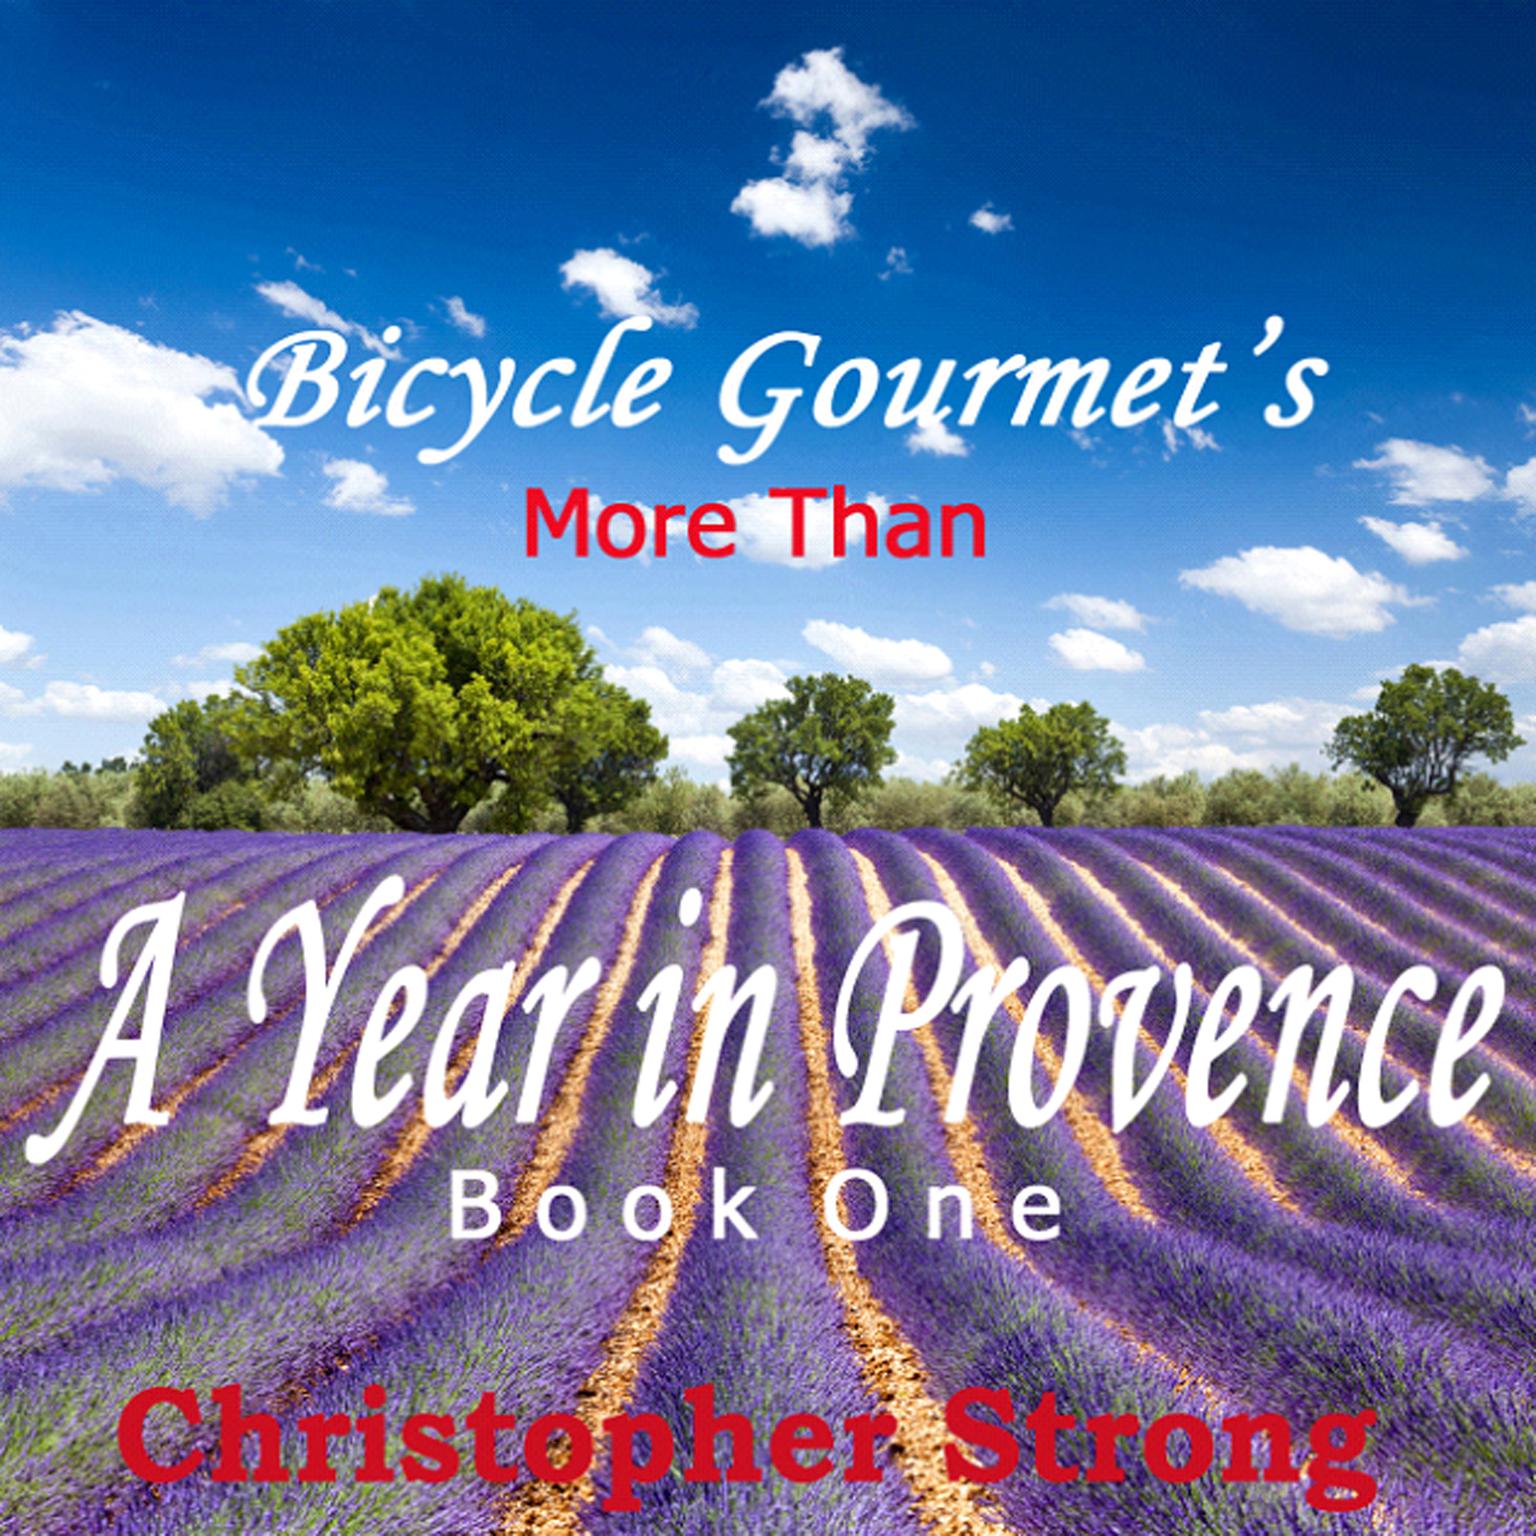 More Than a Year in Provence: Endless Tour de France Travel Audiobook, by Christopher Strong